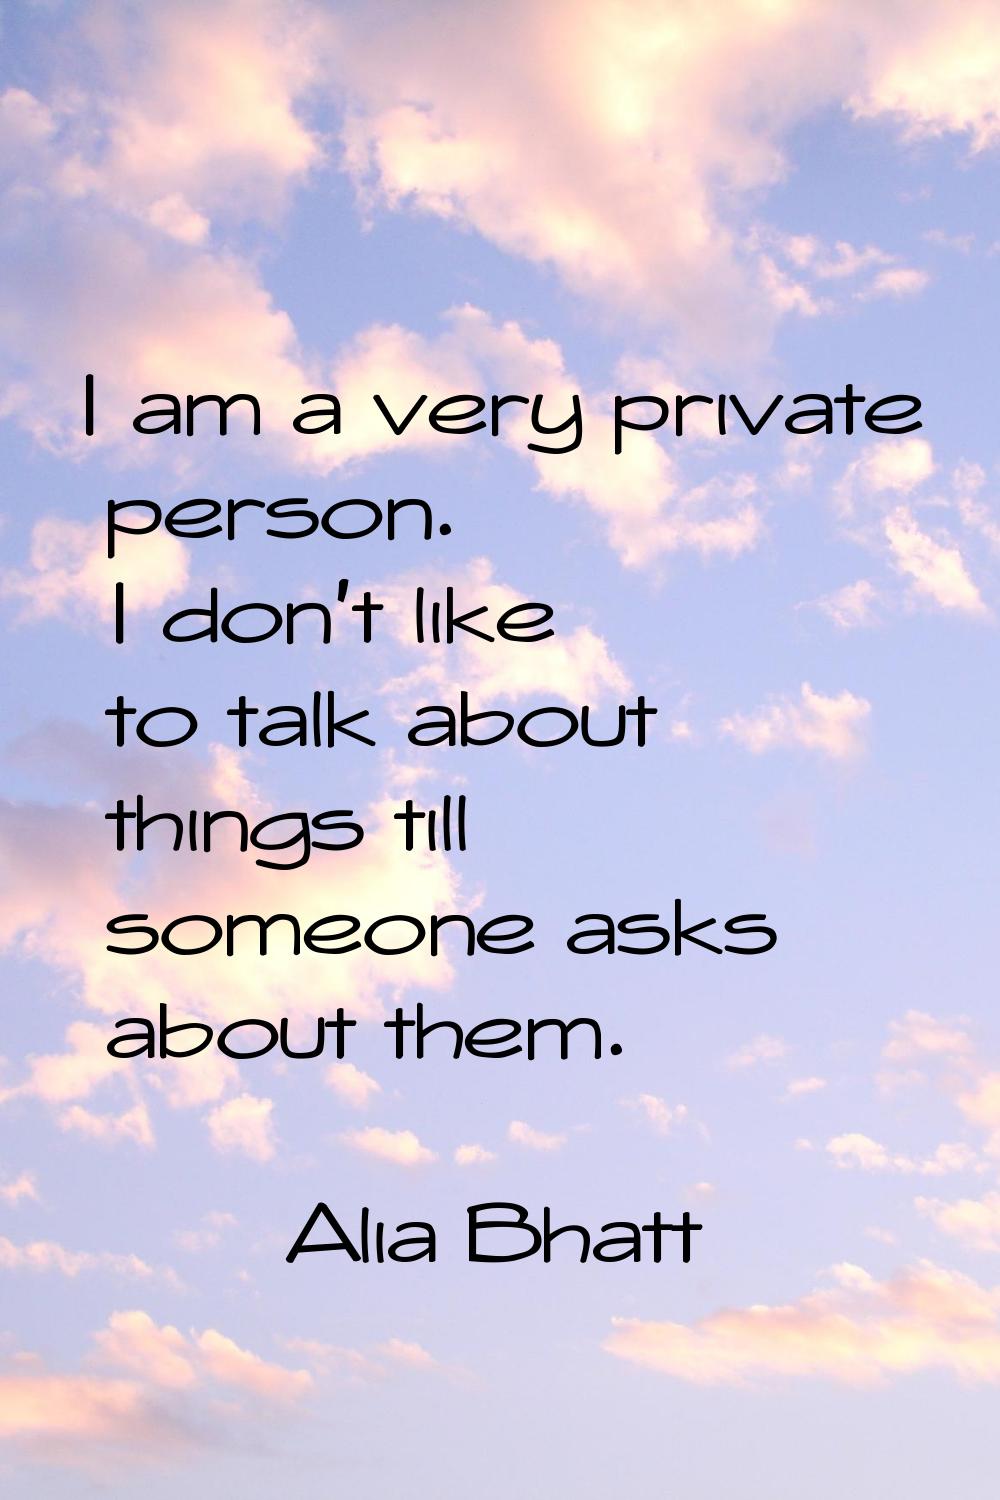 I am a very private person. I don't like to talk about things till someone asks about them.